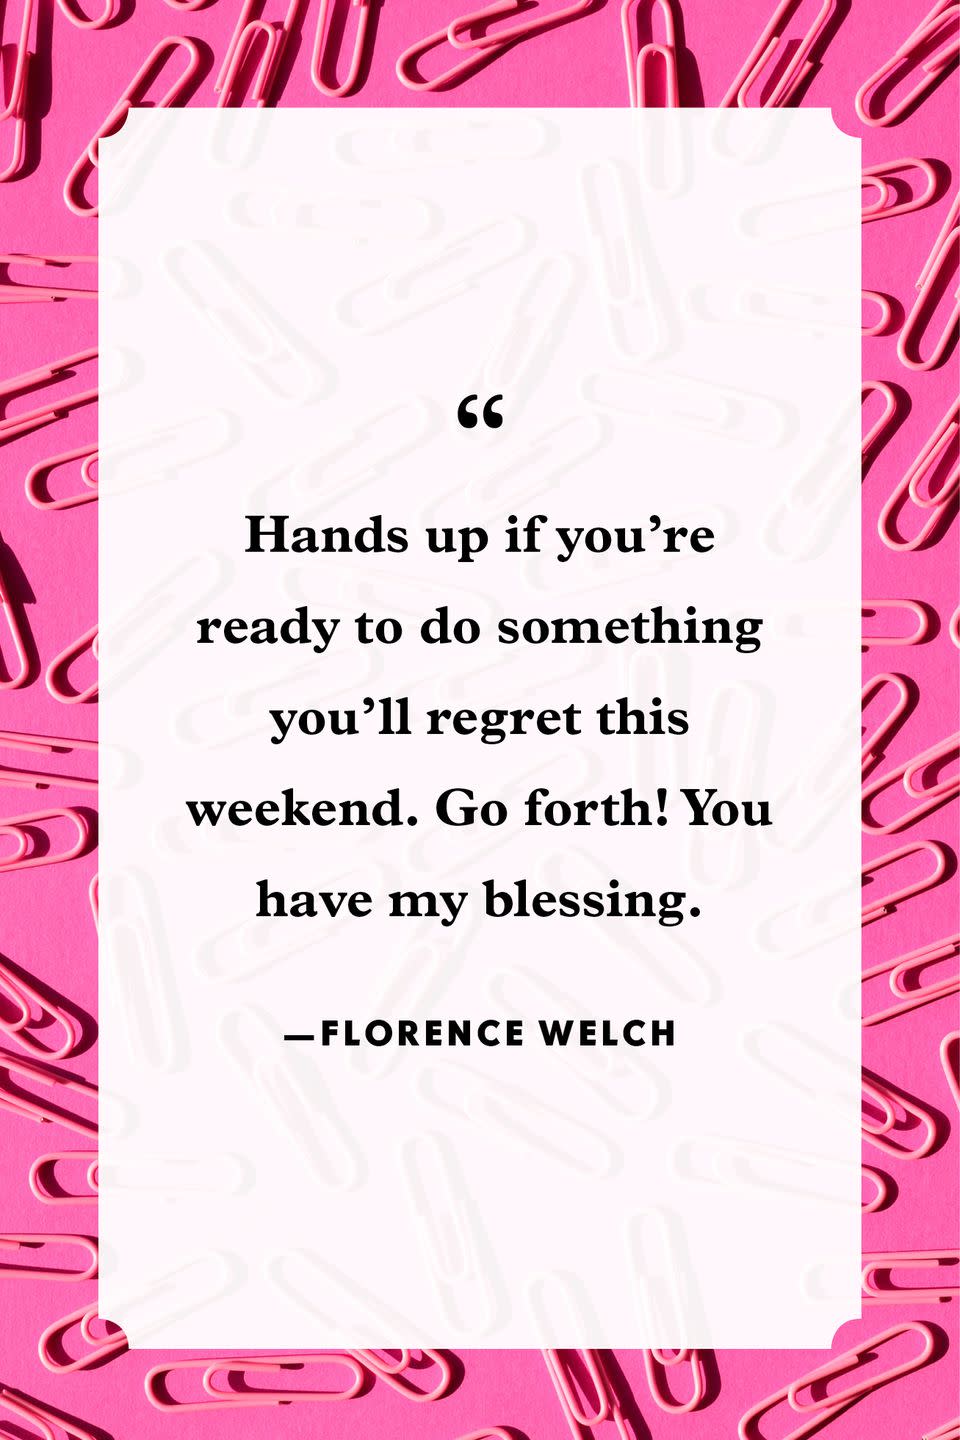 28 Happy Friday Quotes to Help You Make the Most of the Weekend